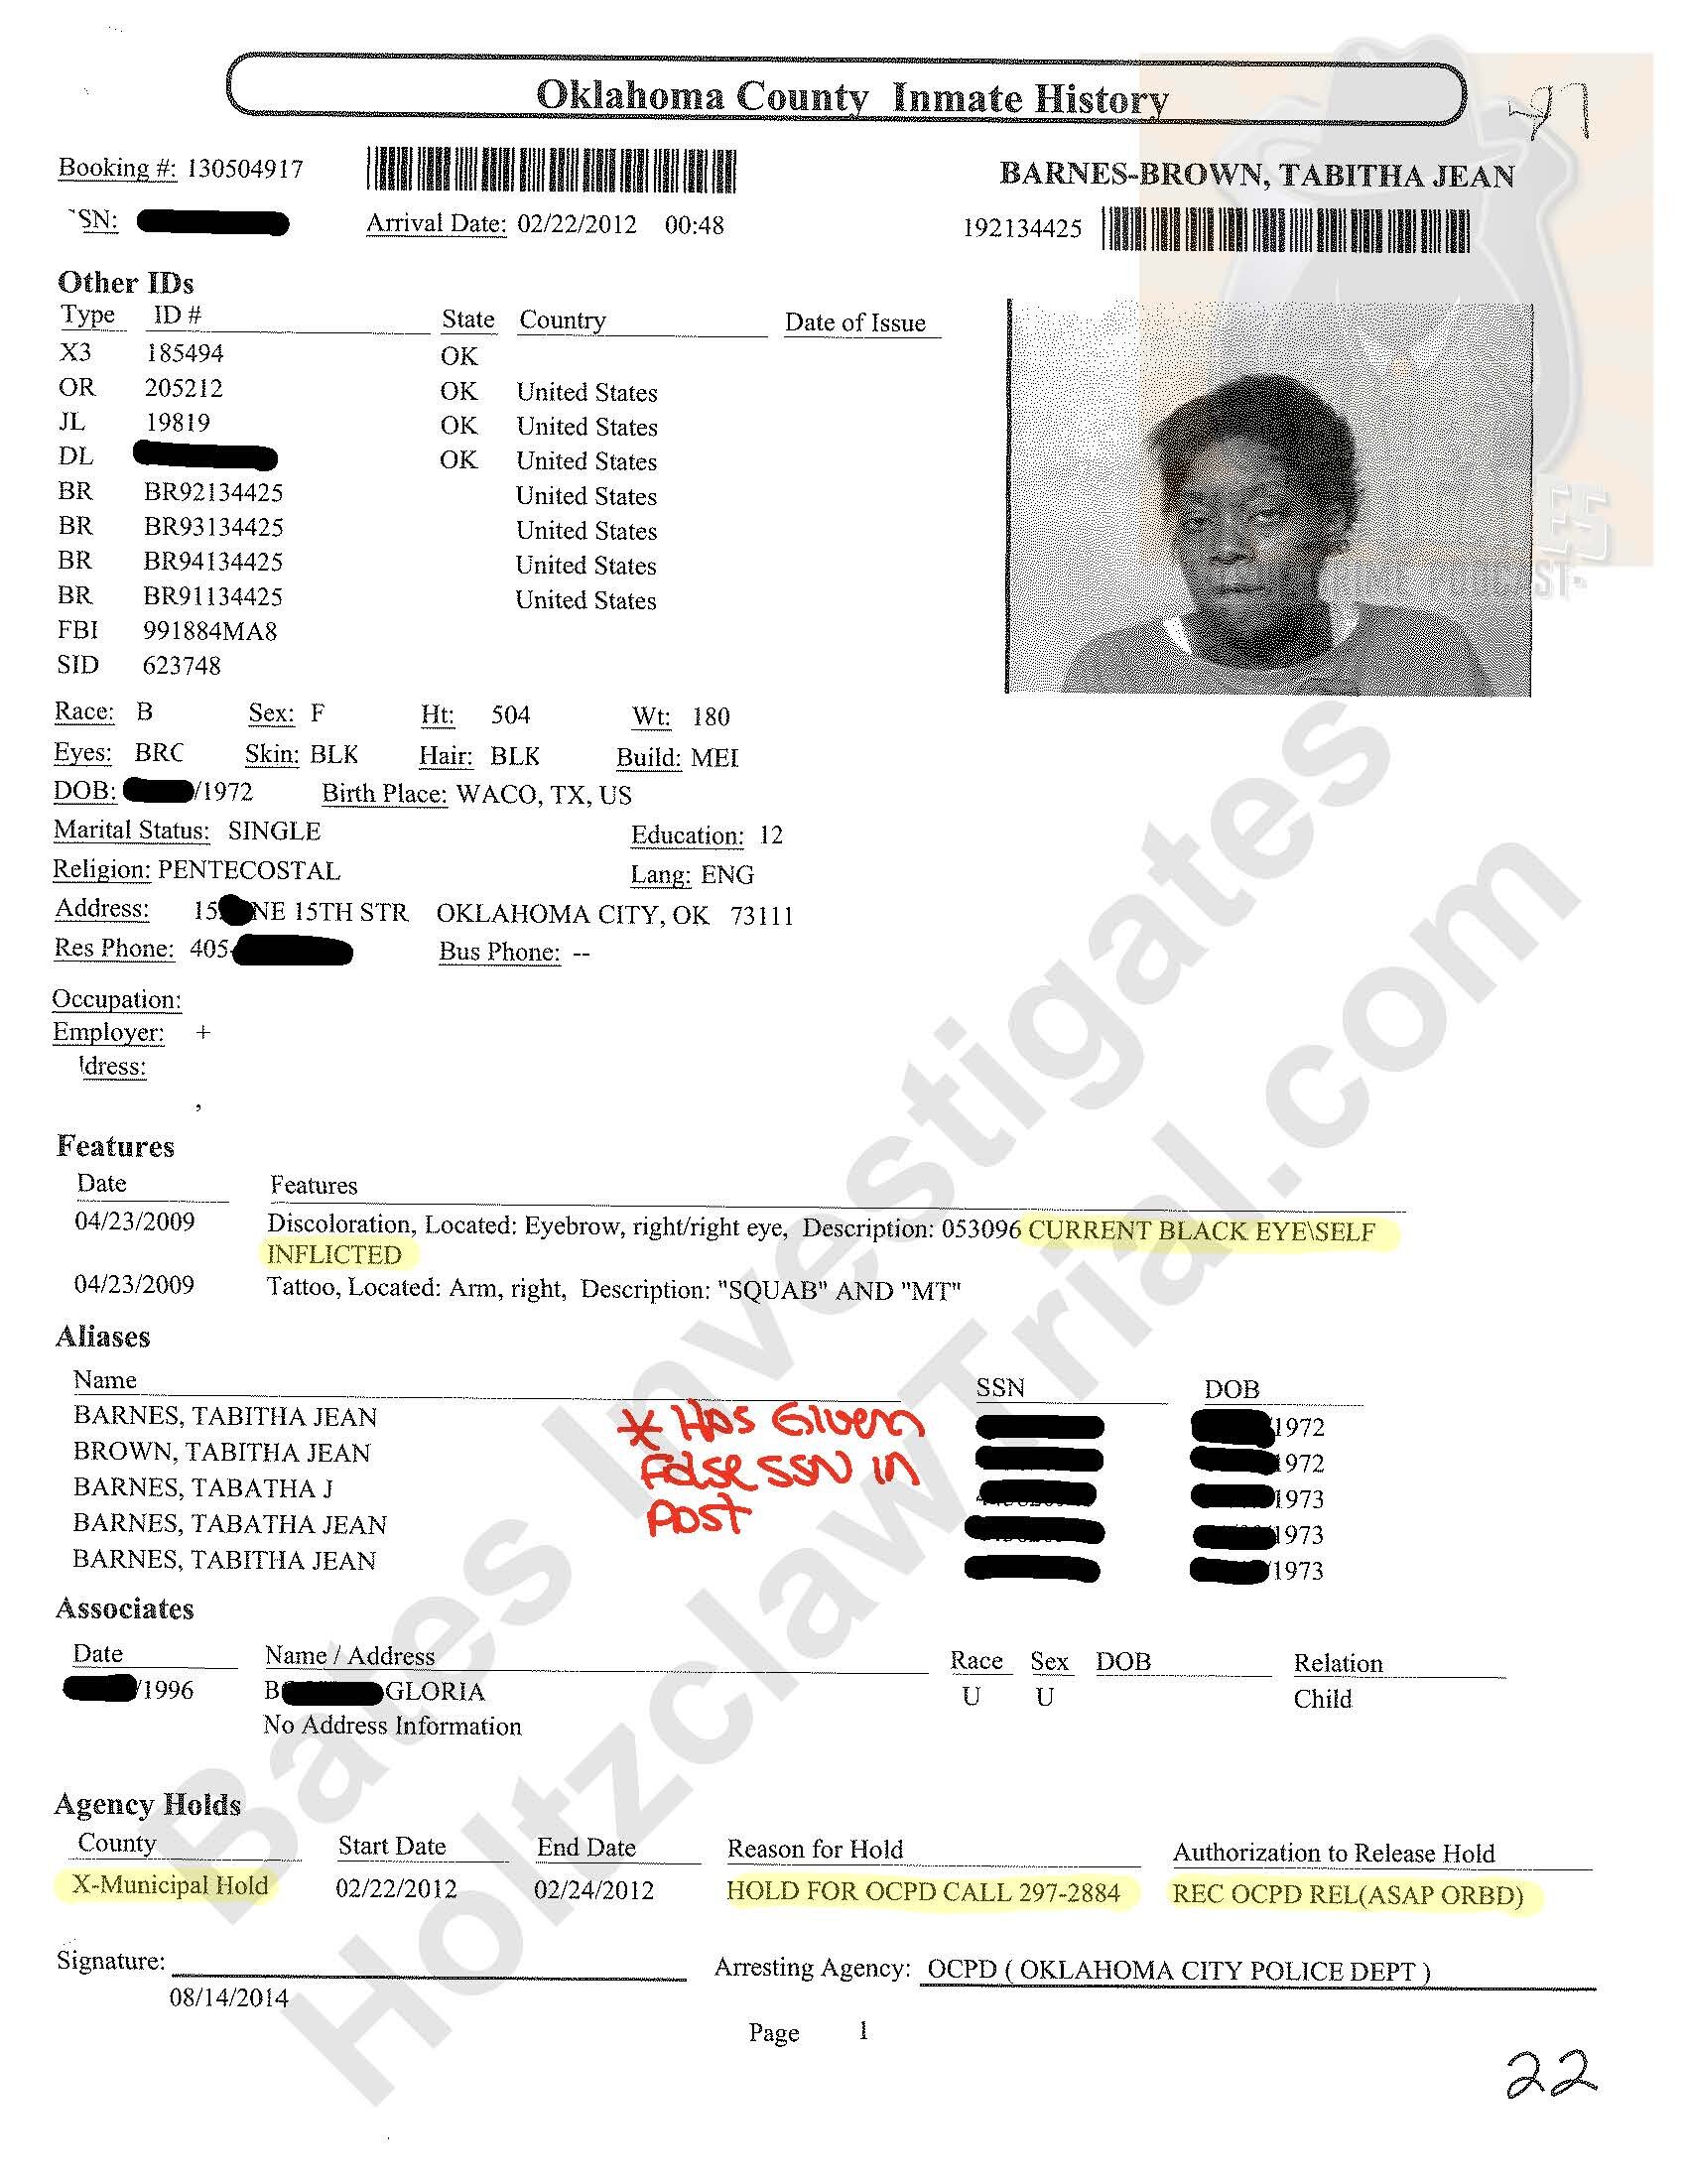 Tabitha Barnes Police Report to Post_Page_15.jpg